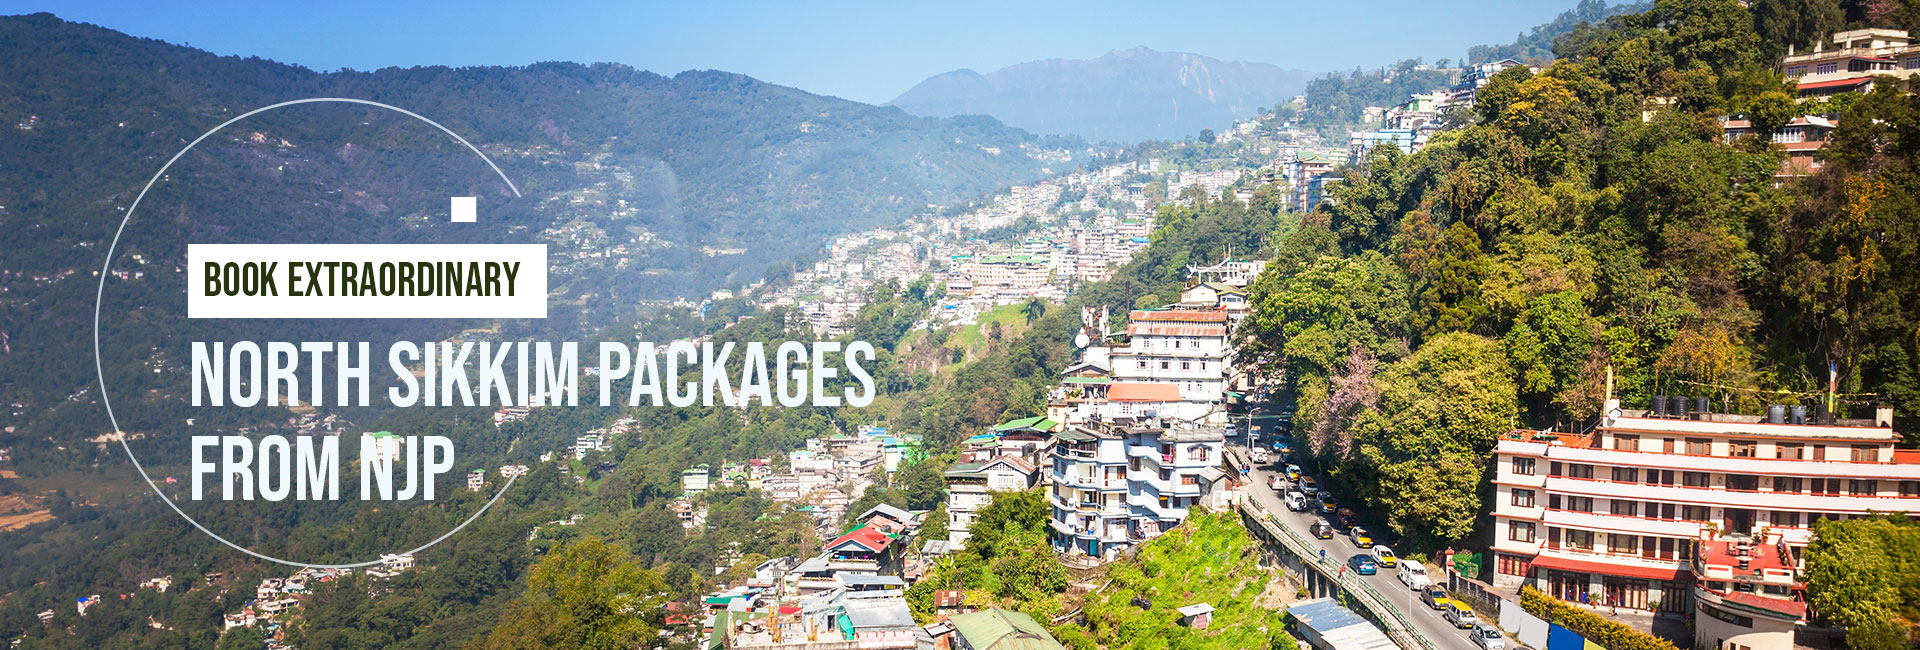 Best North Sikkim Packages from NJP - Be An Explorer